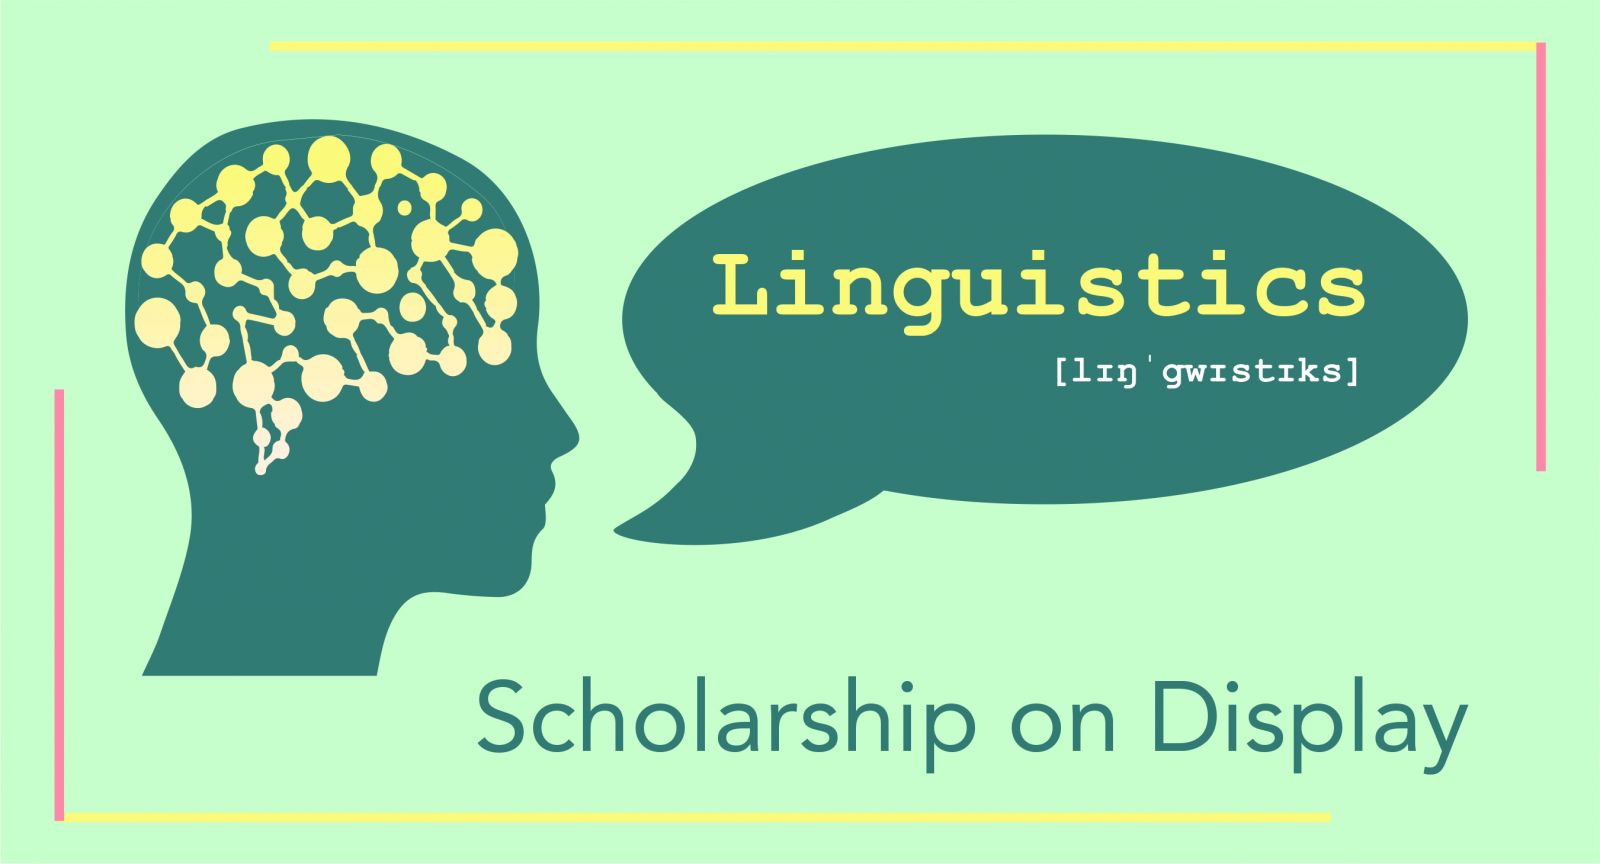 Graphic with a blue head with interconnected dots in the shape of a brain, with a speech bubble reading "Linguistics" followed by the IPA spelling of Linguistics, and "Scholarship on Display" in blue text below the head and speech bubble.